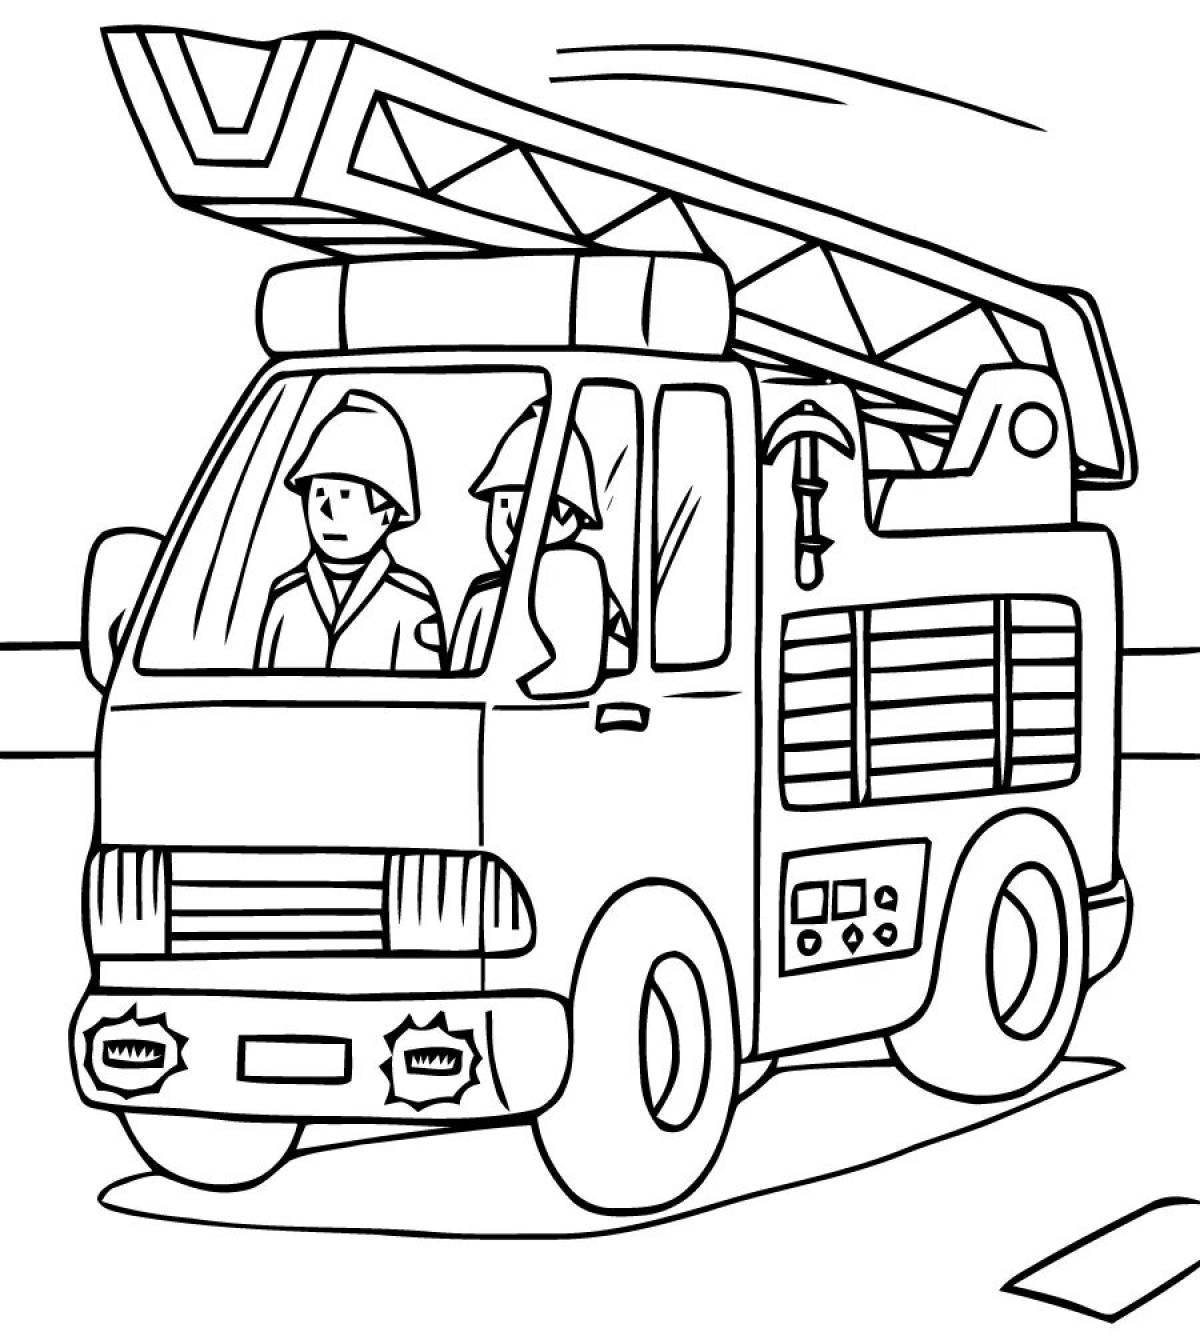 Coloring page for fun firefighting equipment